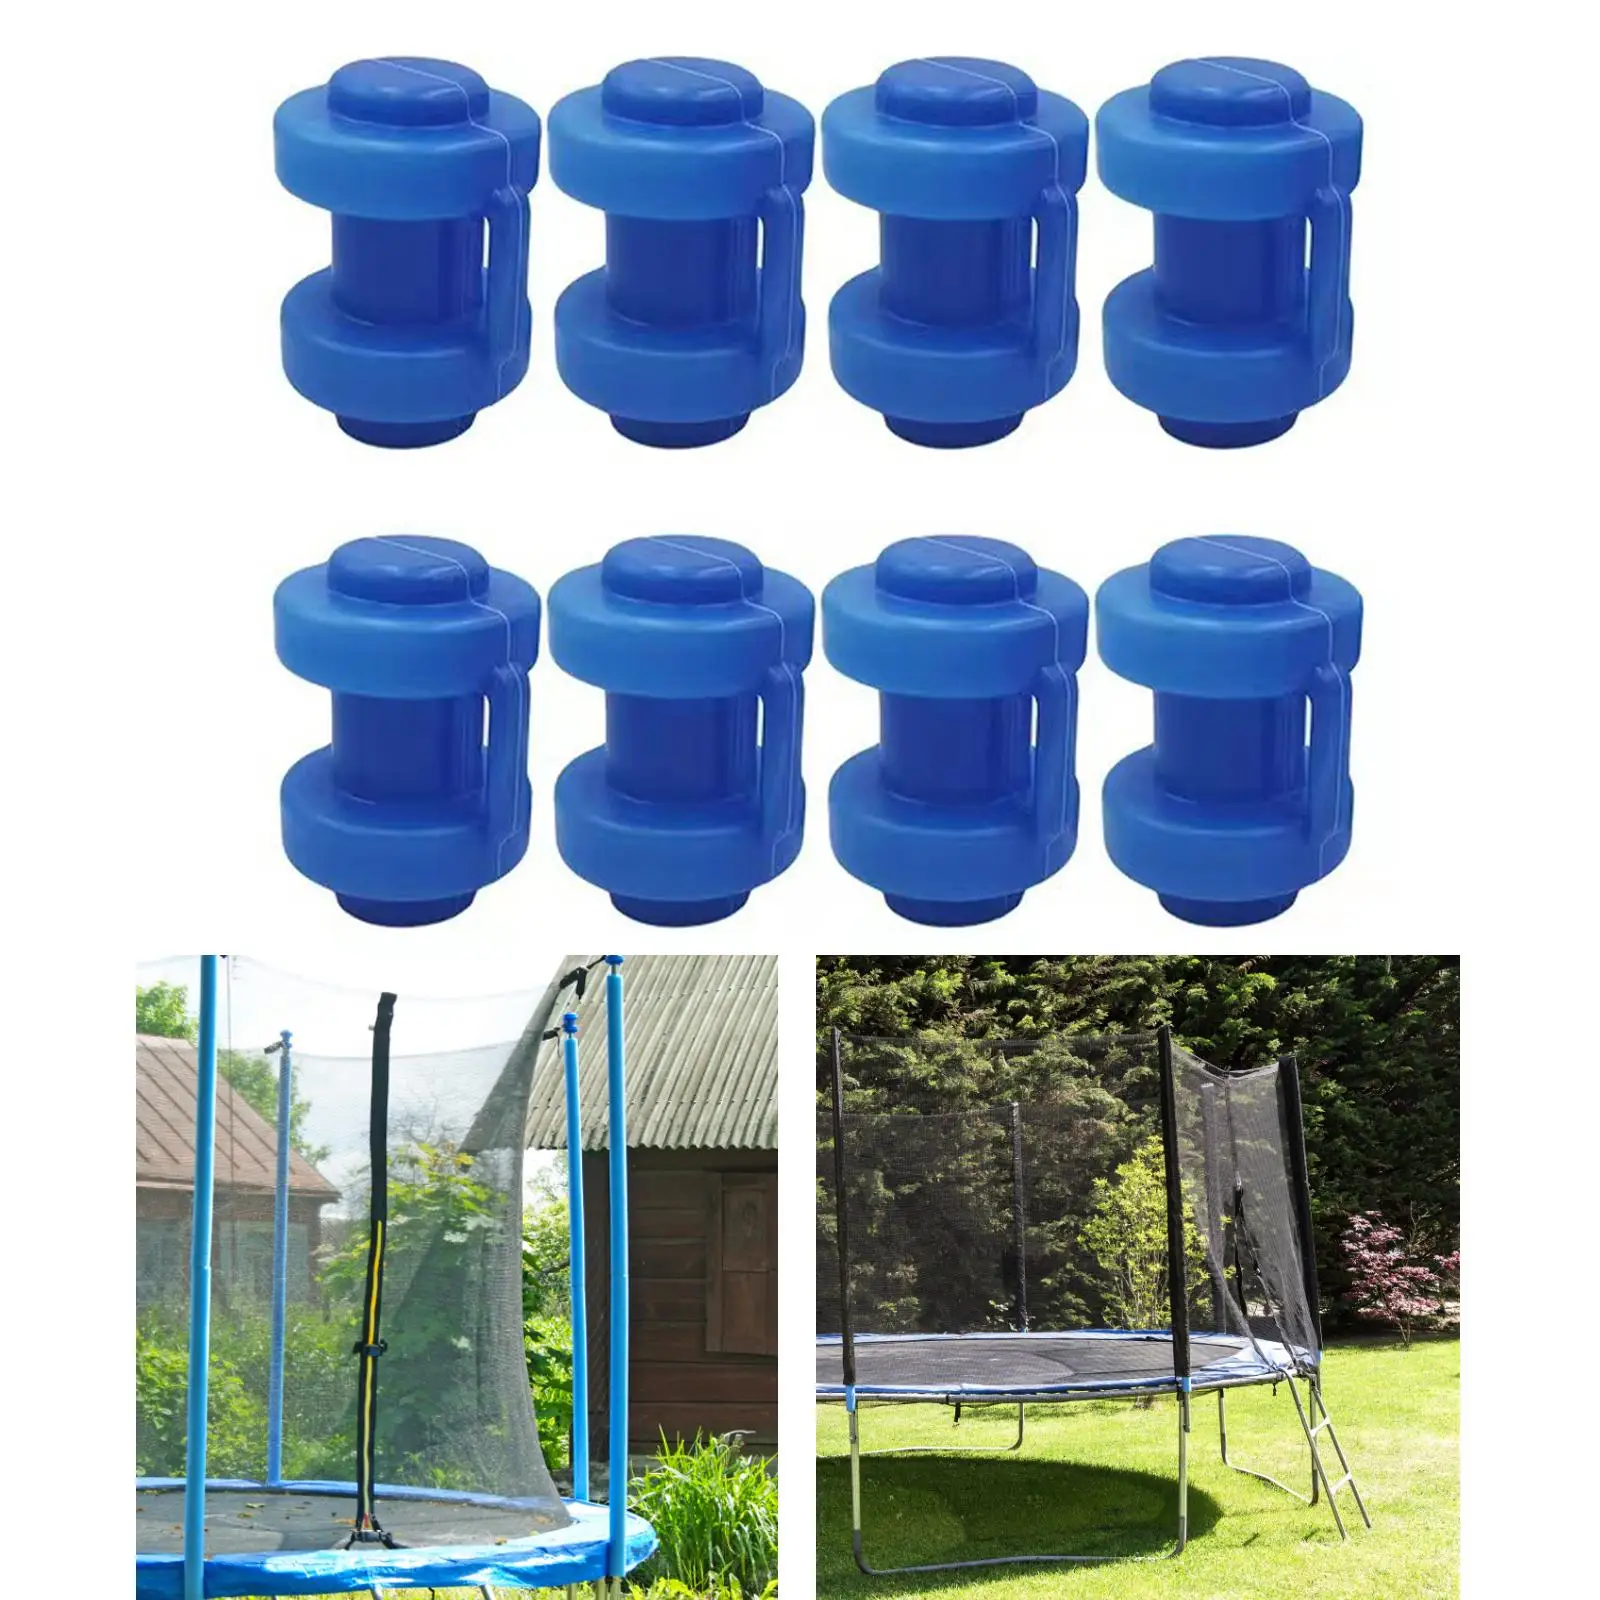 8PCS Trampoline Protective Cover Caps Trampoline Net Protective Cover Trampoline Pole Caps For Net Hook